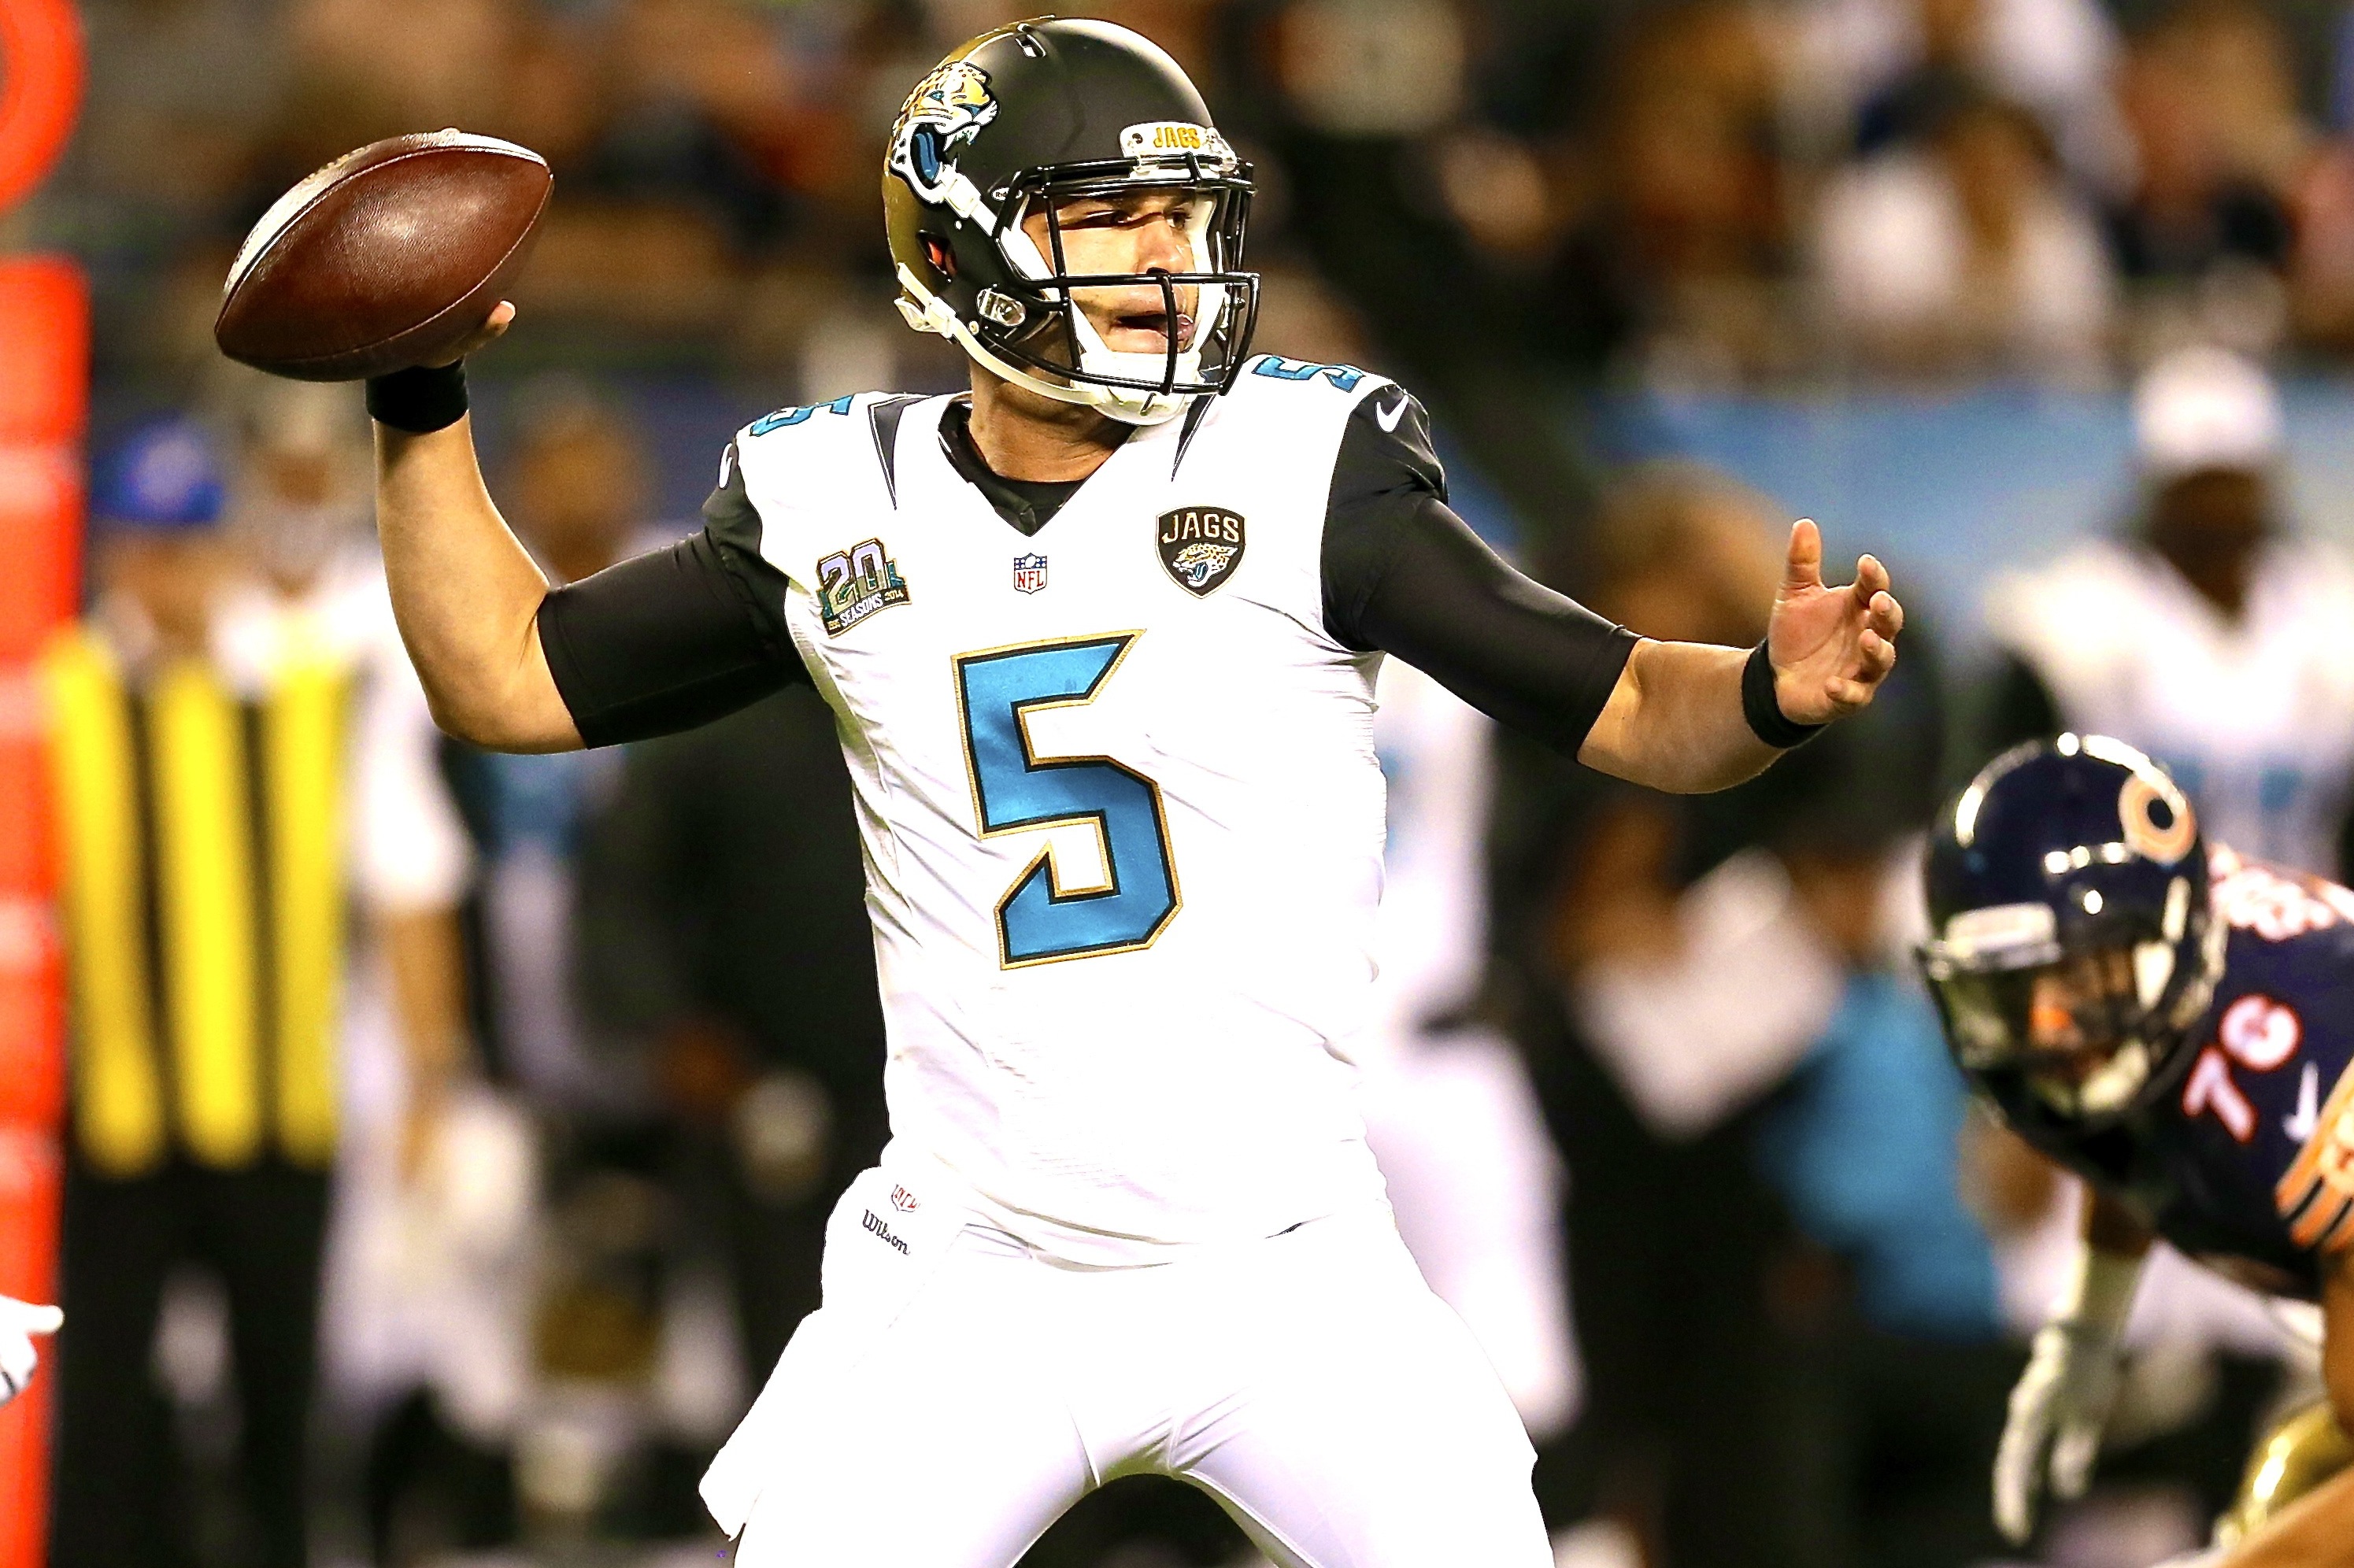 Blake Bortles Proves He's Ready to Be Week 1 Starter for Young